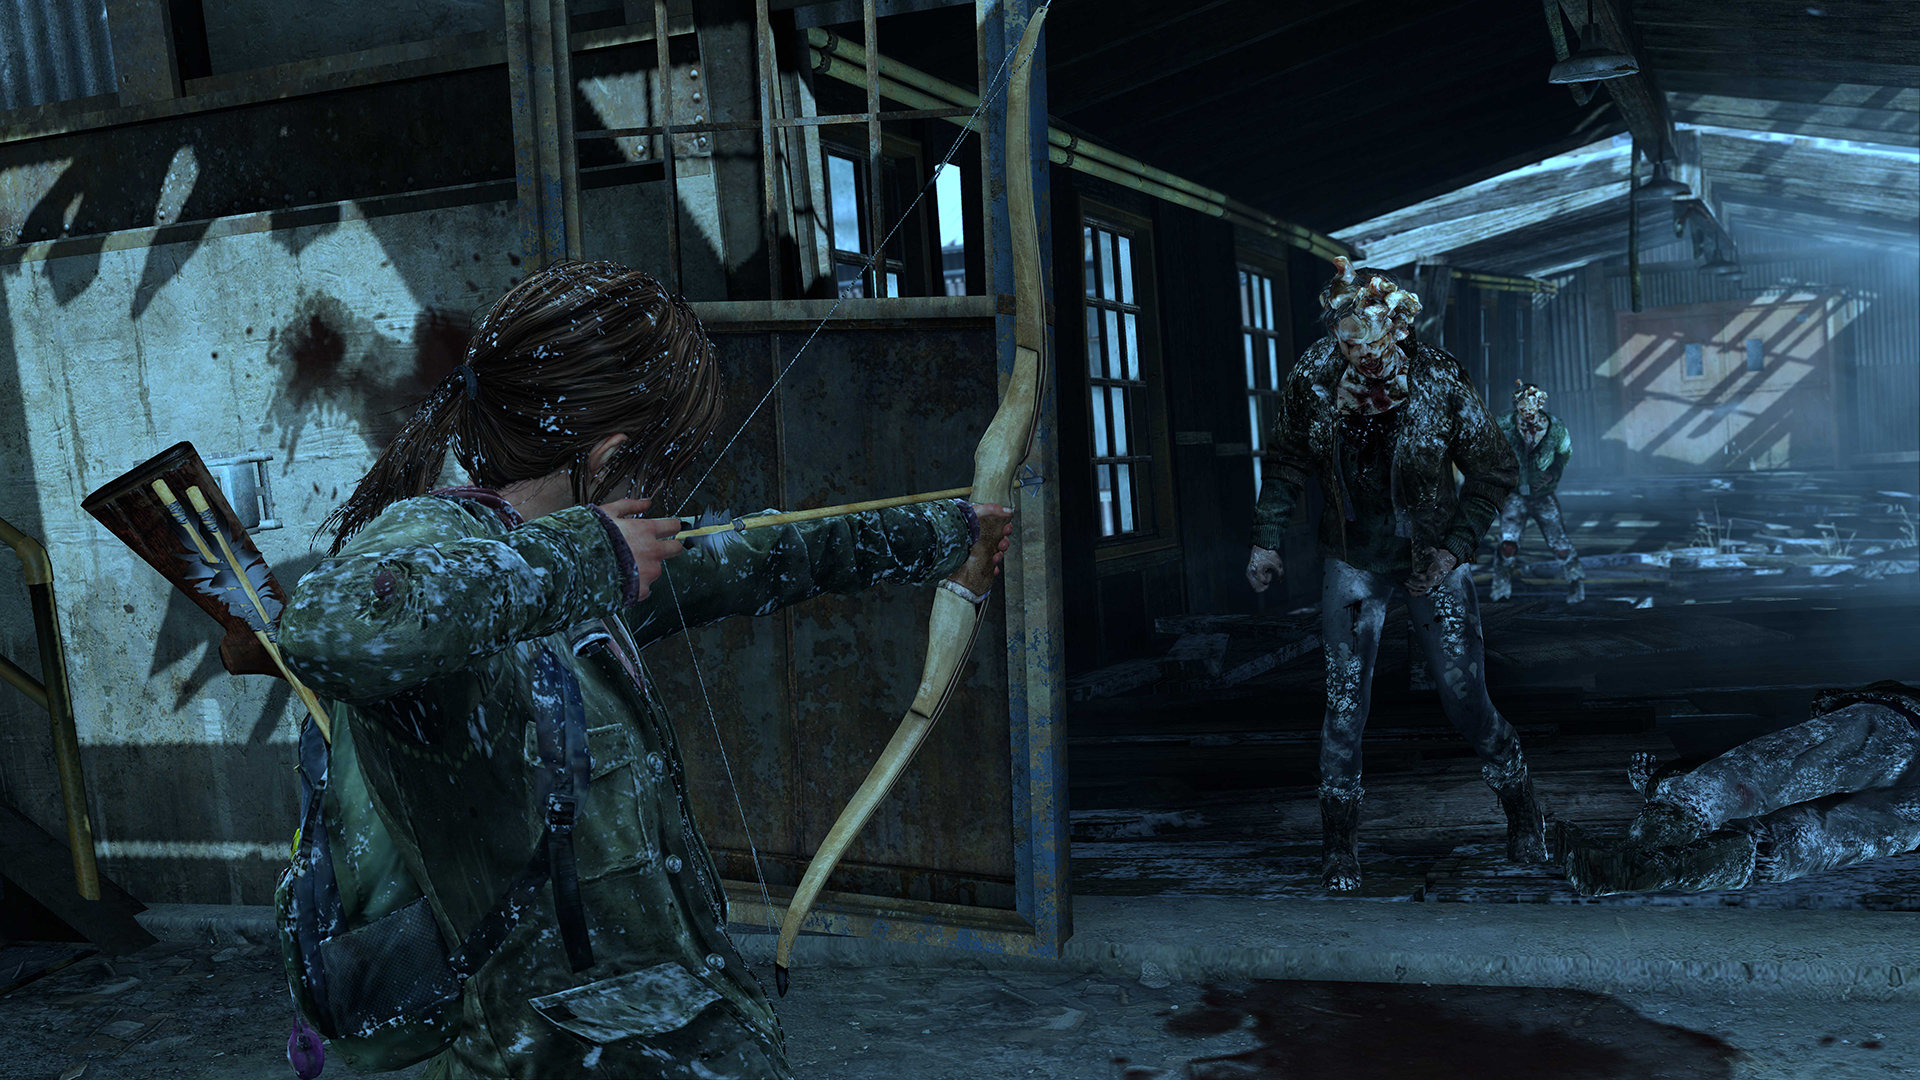 The Last of Us™ Remastered Game | PS4 - PlayStation